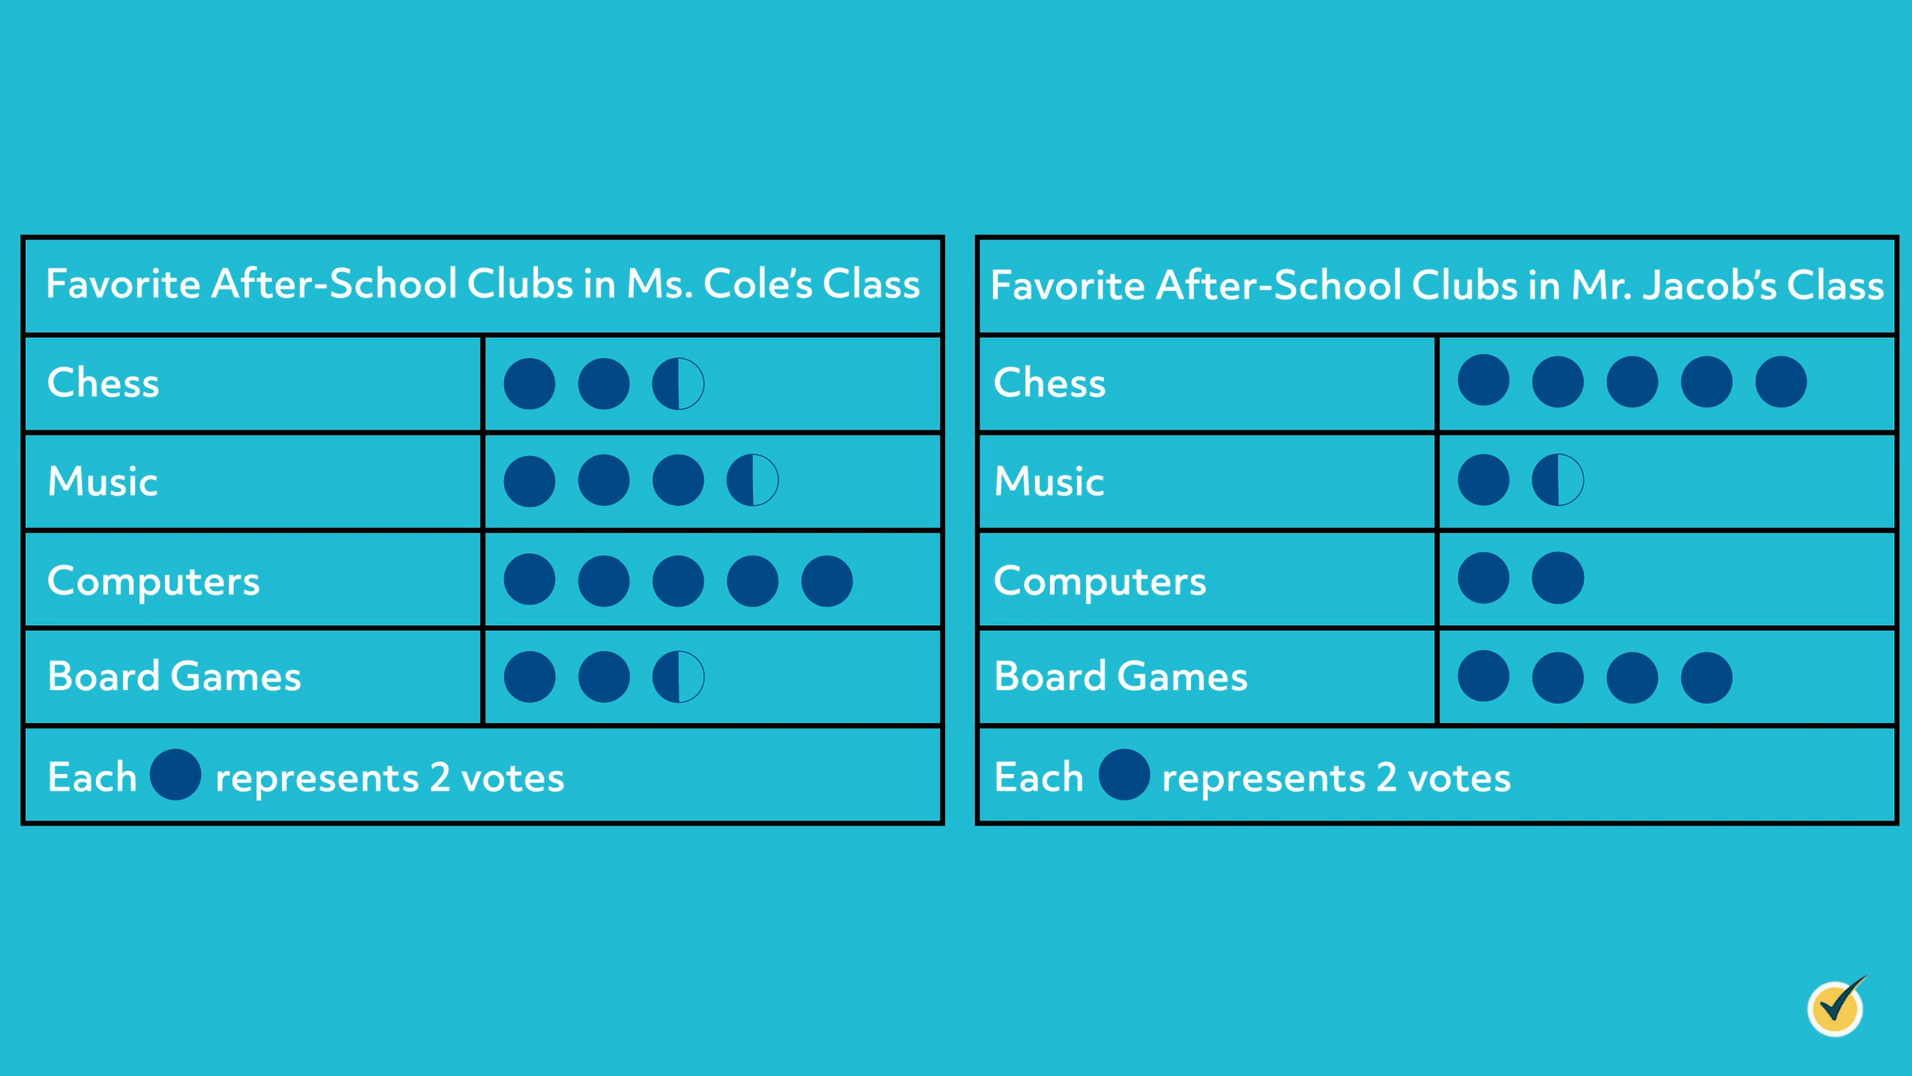 Pictograph of the favorite after school clubs in Ms. Cole's class; 2.5 symbols for chess, 3.5 for music, 5 for computers, and 2.5 for board games. Then favorite after-school clubs in Mr. Jacob's class; Chess has 5 symbols, 1.5 for music, 2 for computers, and 4 for board games. 